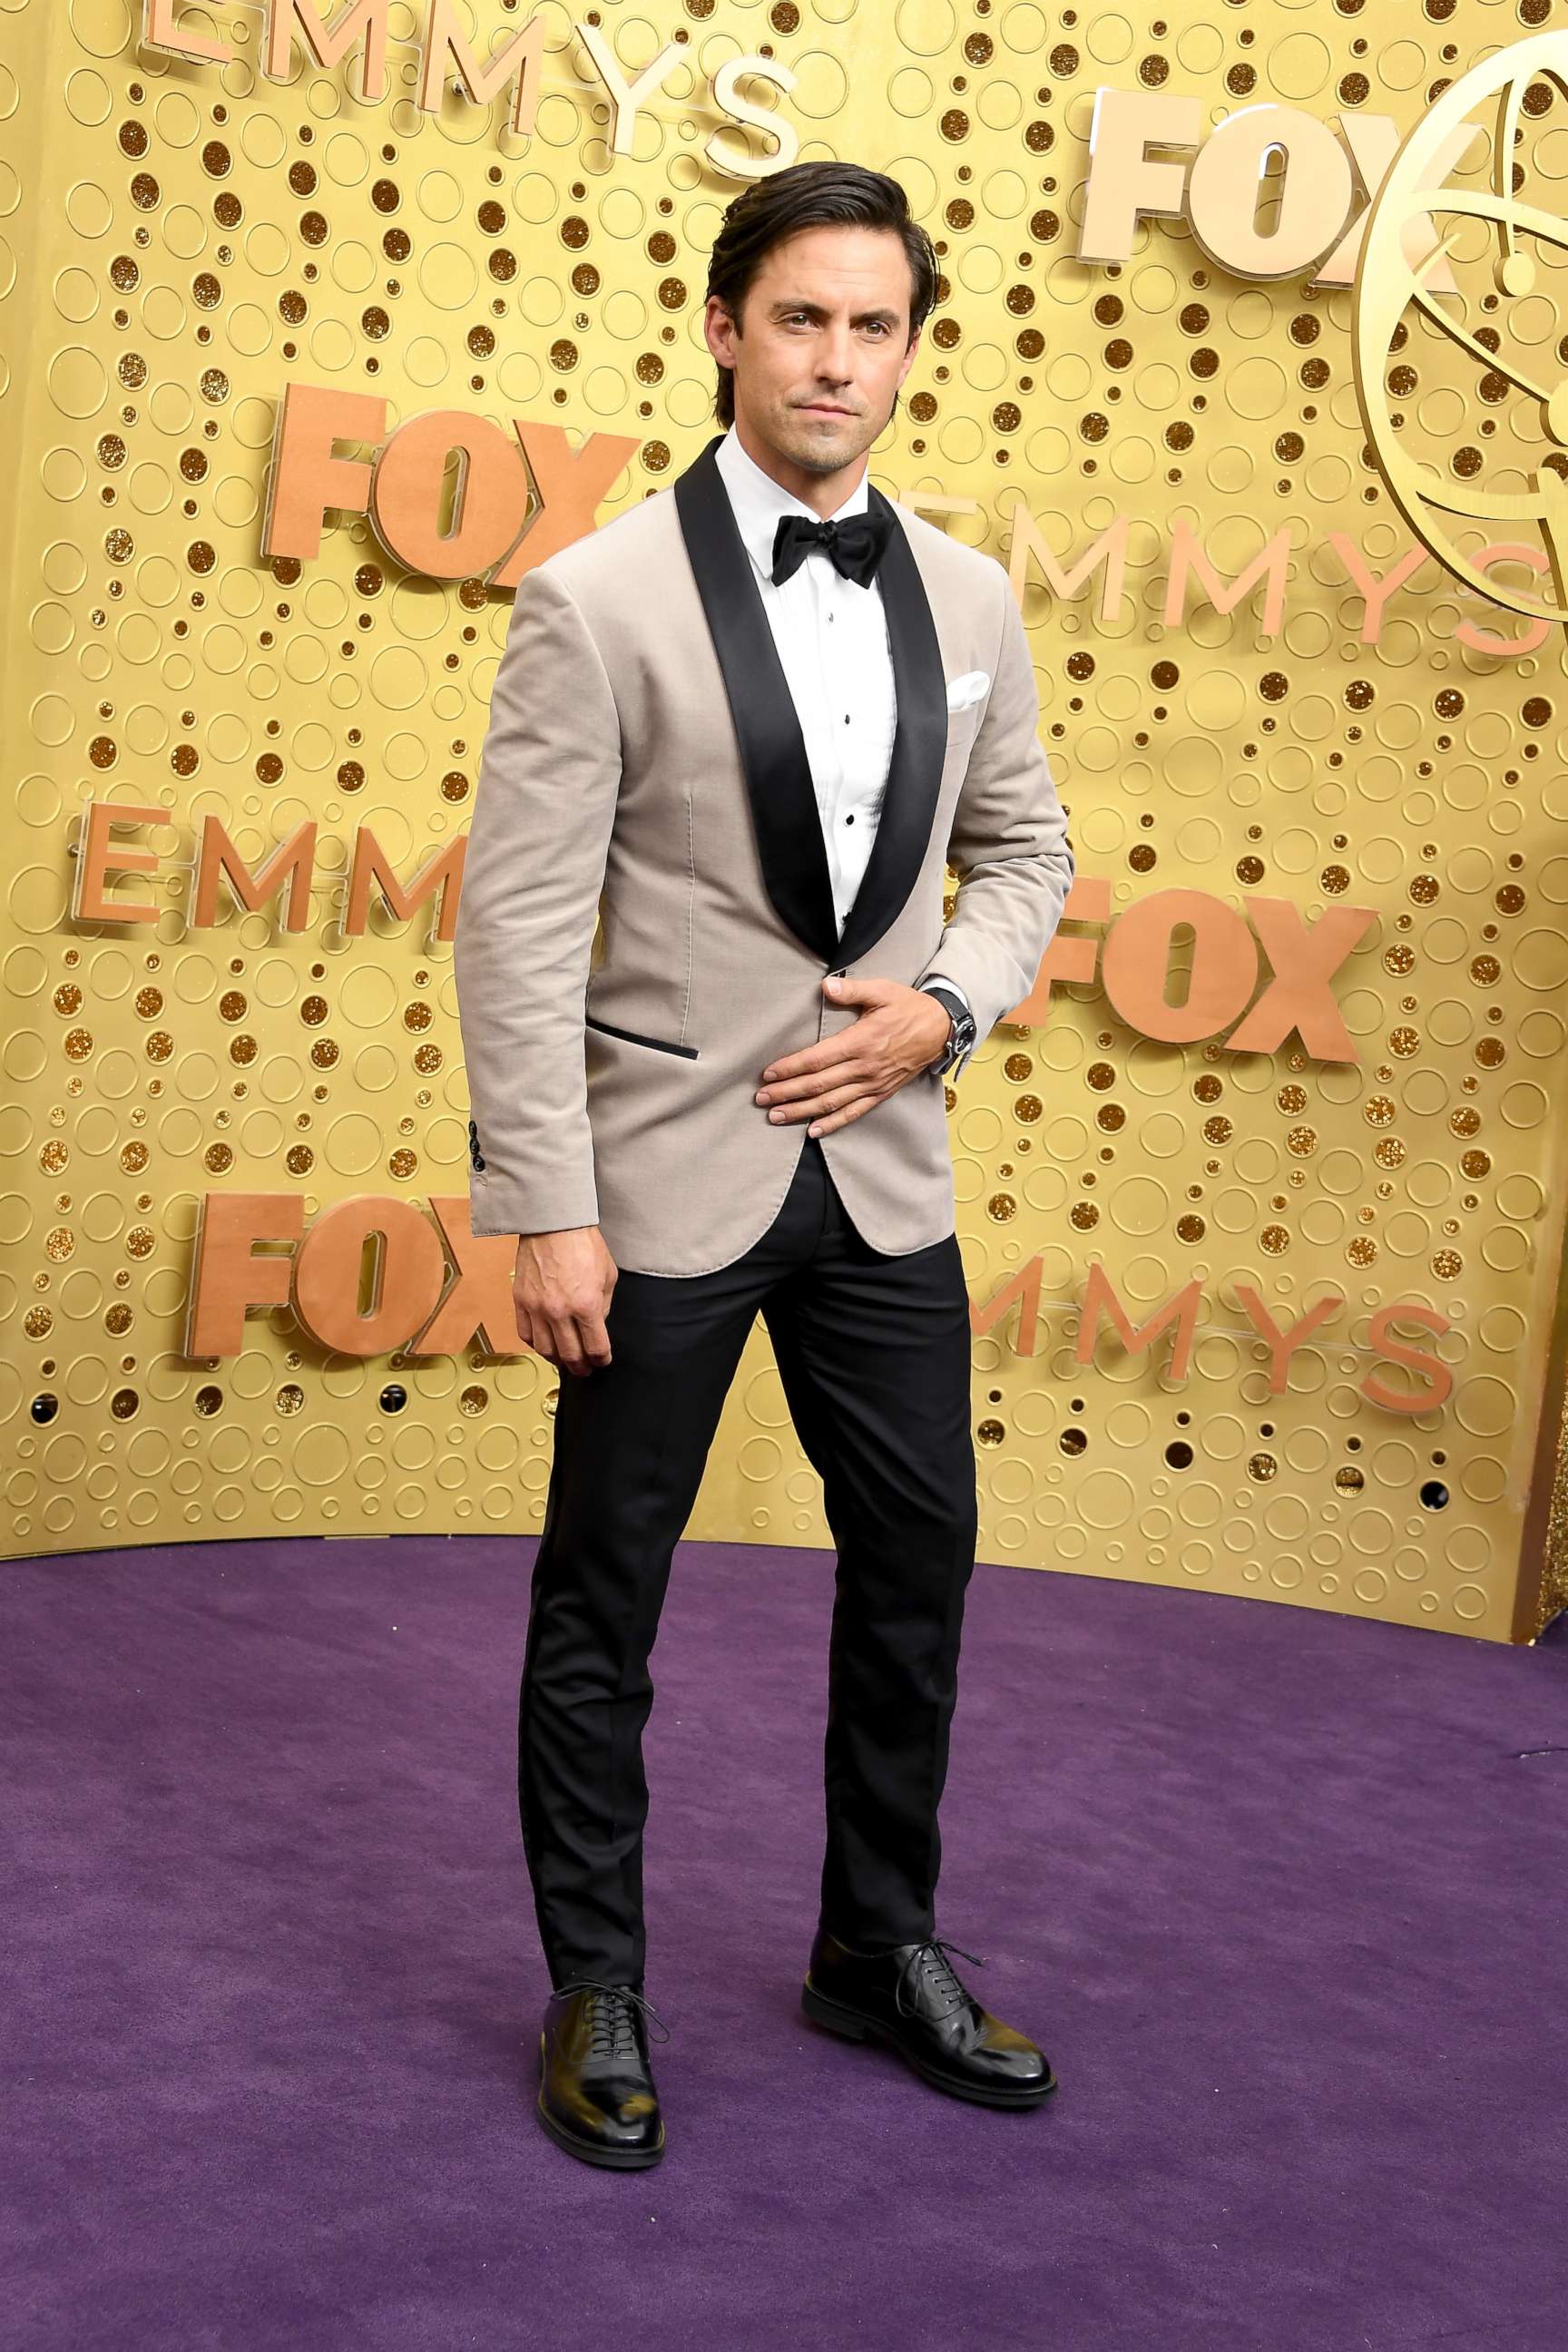 PHOTO: Milo Ventimiglia attends the 71st Emmy Awards at Microsoft Theater on September 22, 2019 in Los Angeles, California.